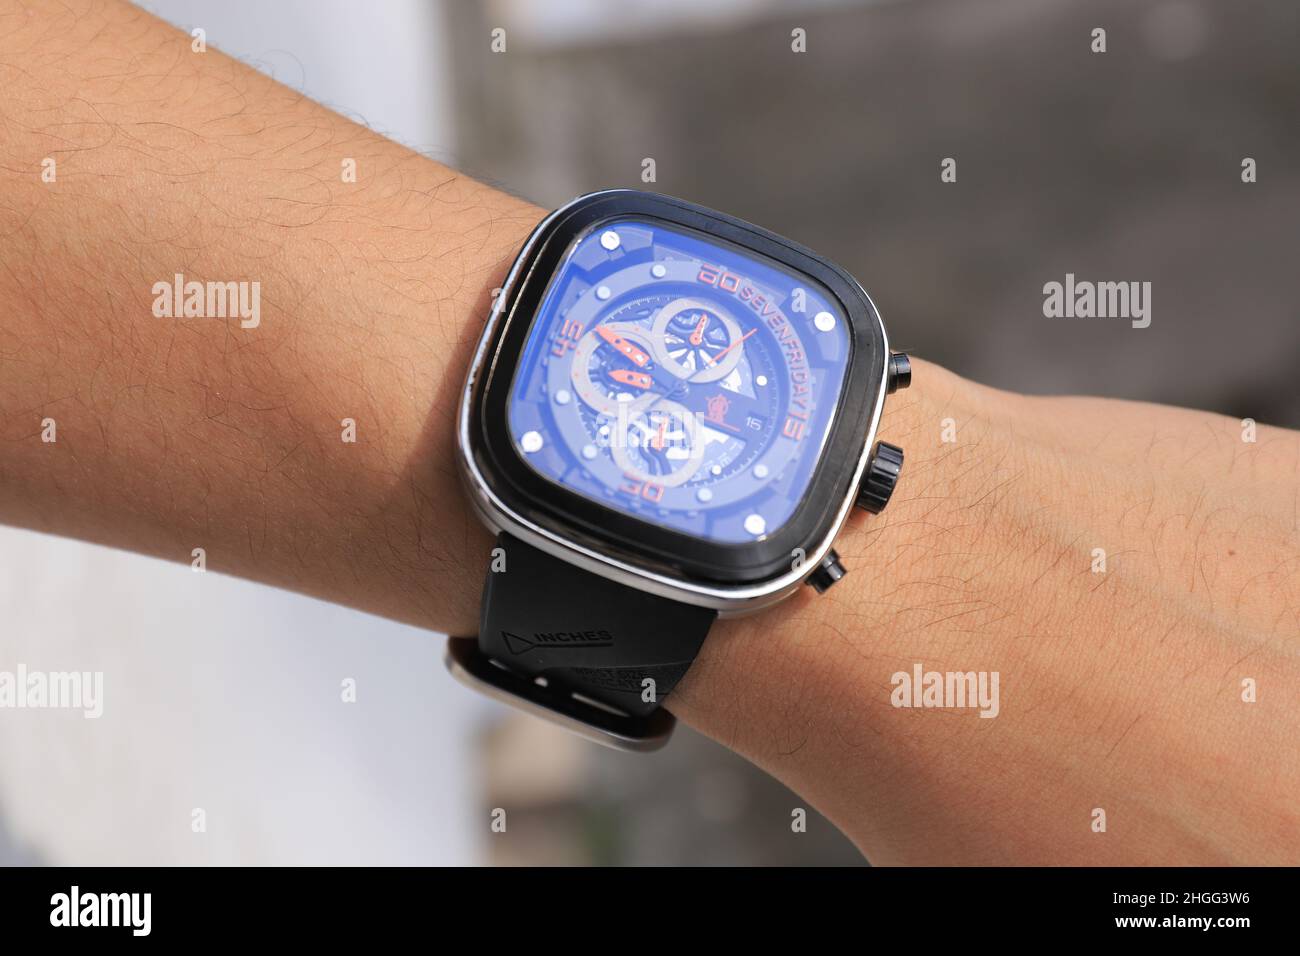 SURABAYA, EAST JAVA - January 15, 2021: selective focus, man hand with Sevenfriday brand watch on a blur background Stock Photo